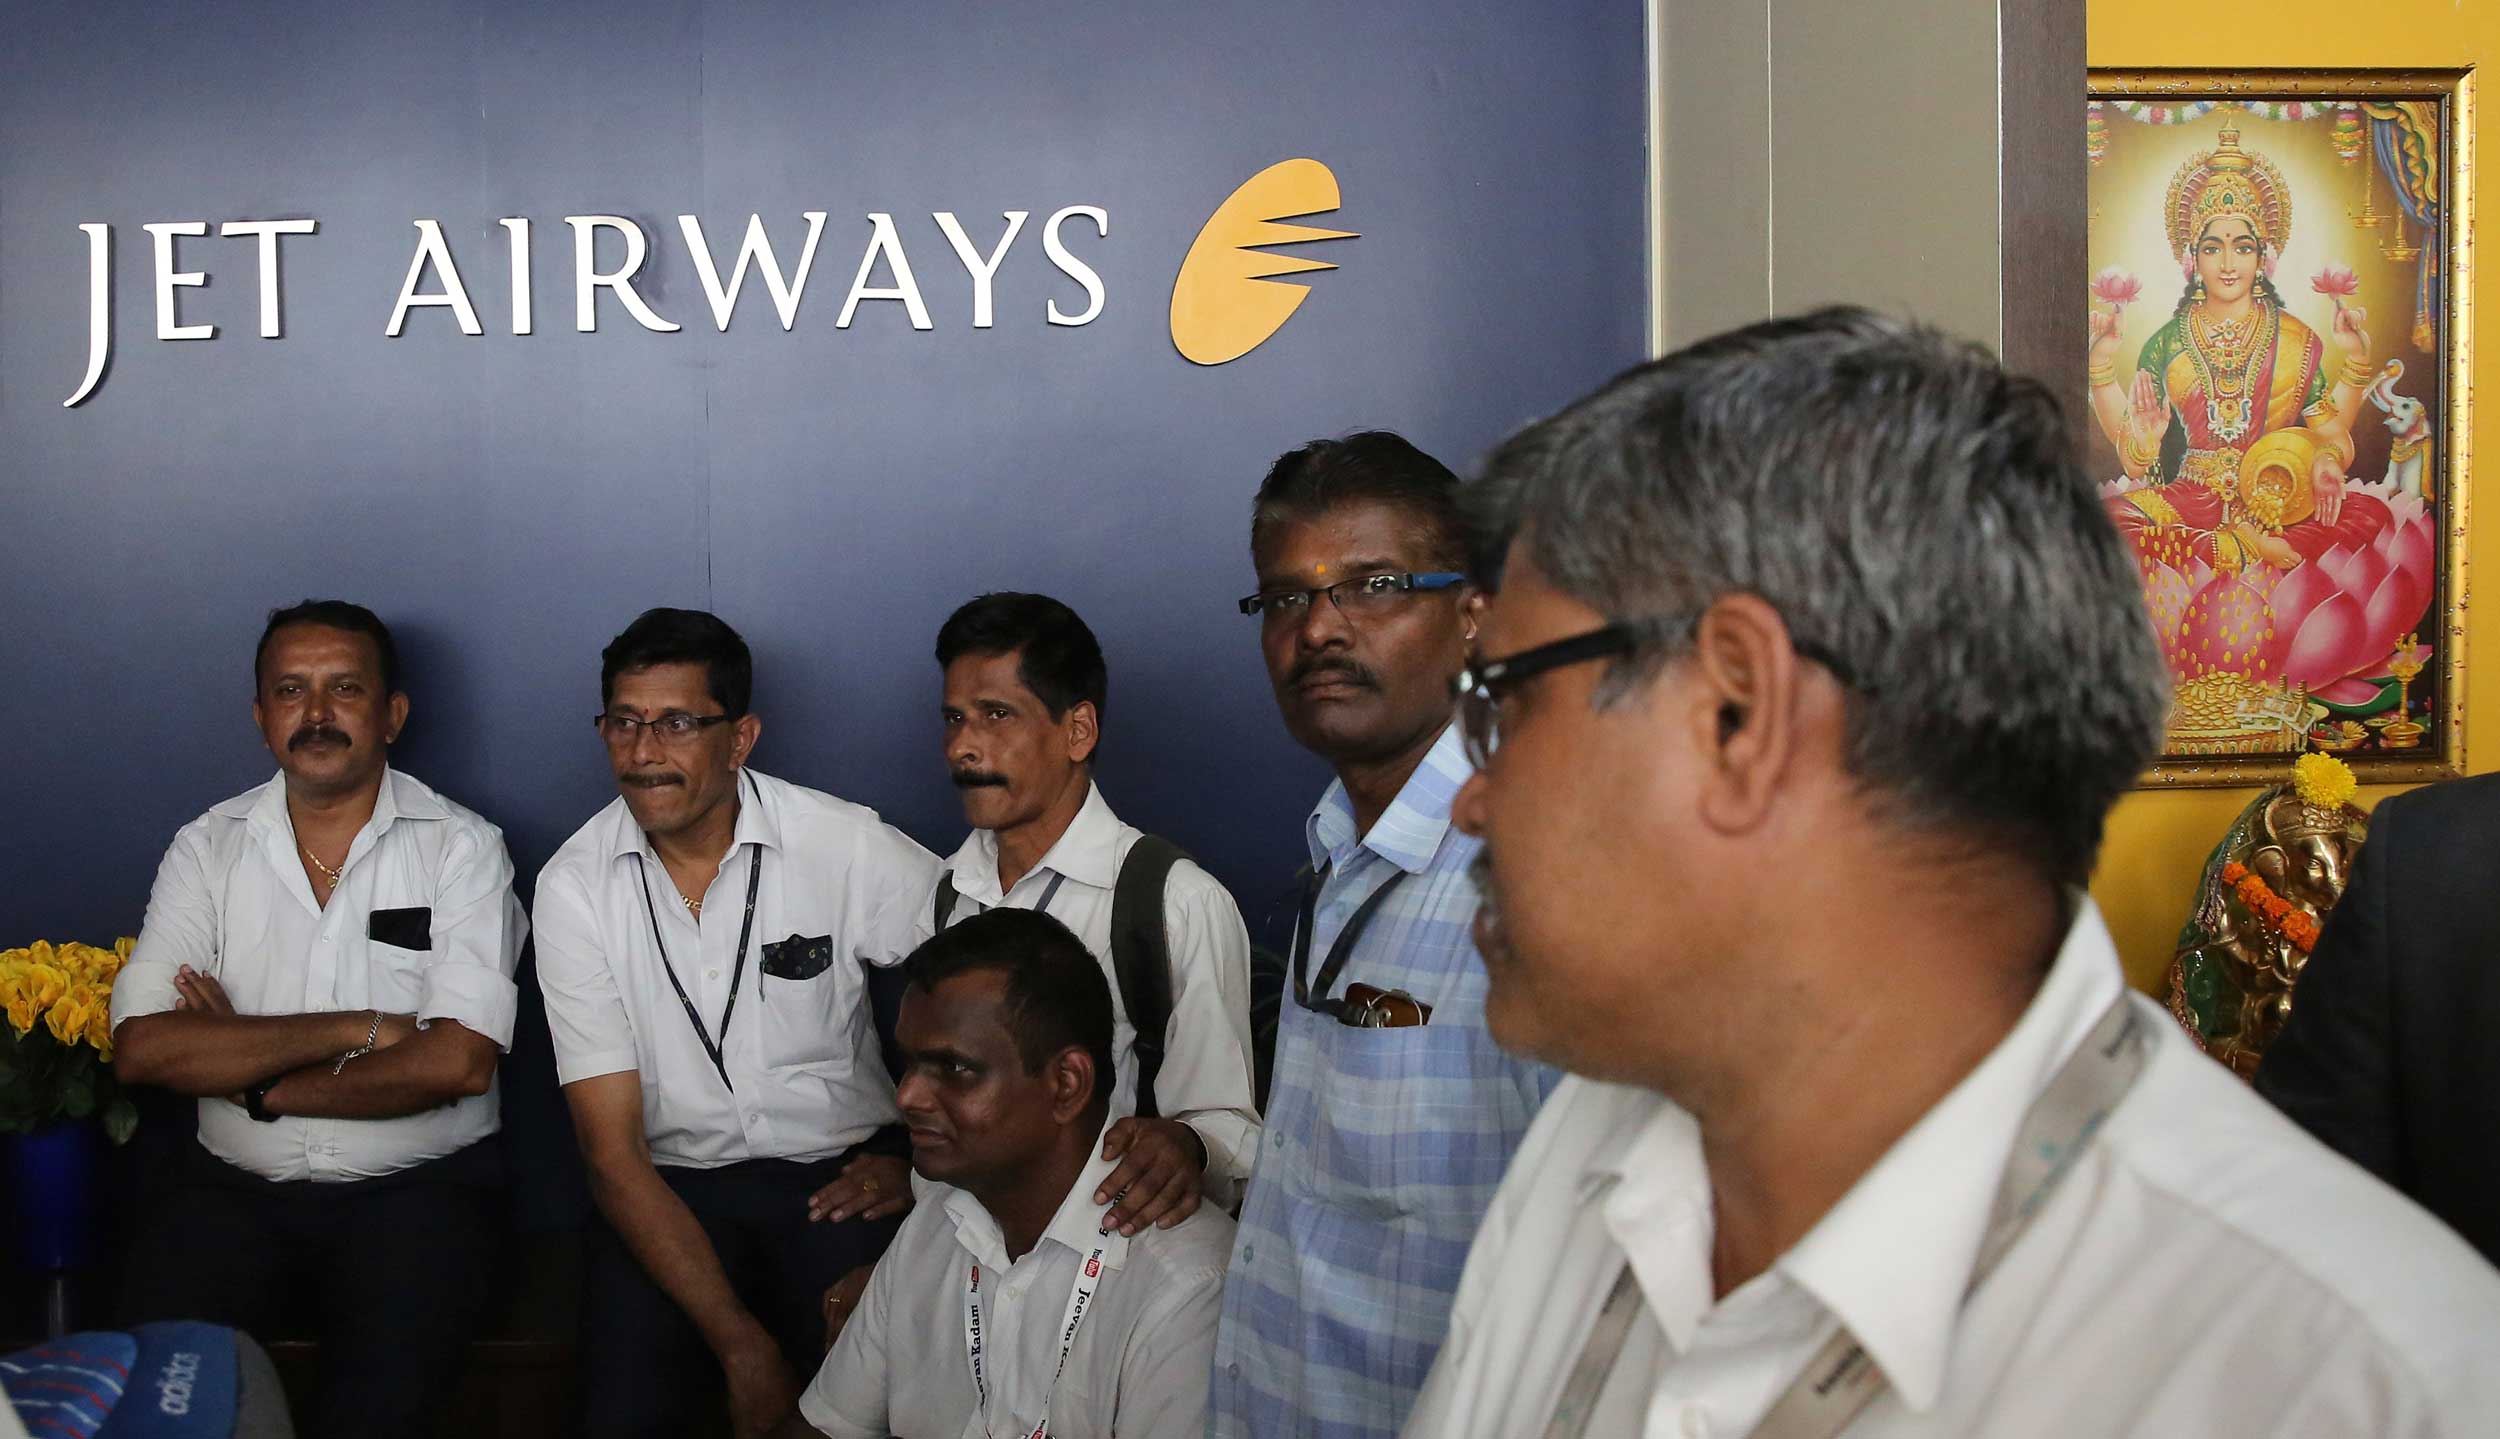 Employees of Jet Airways gather to demand clarification on unpaid salaries at the company headquarters in Mumbai, on April 18, 2019.